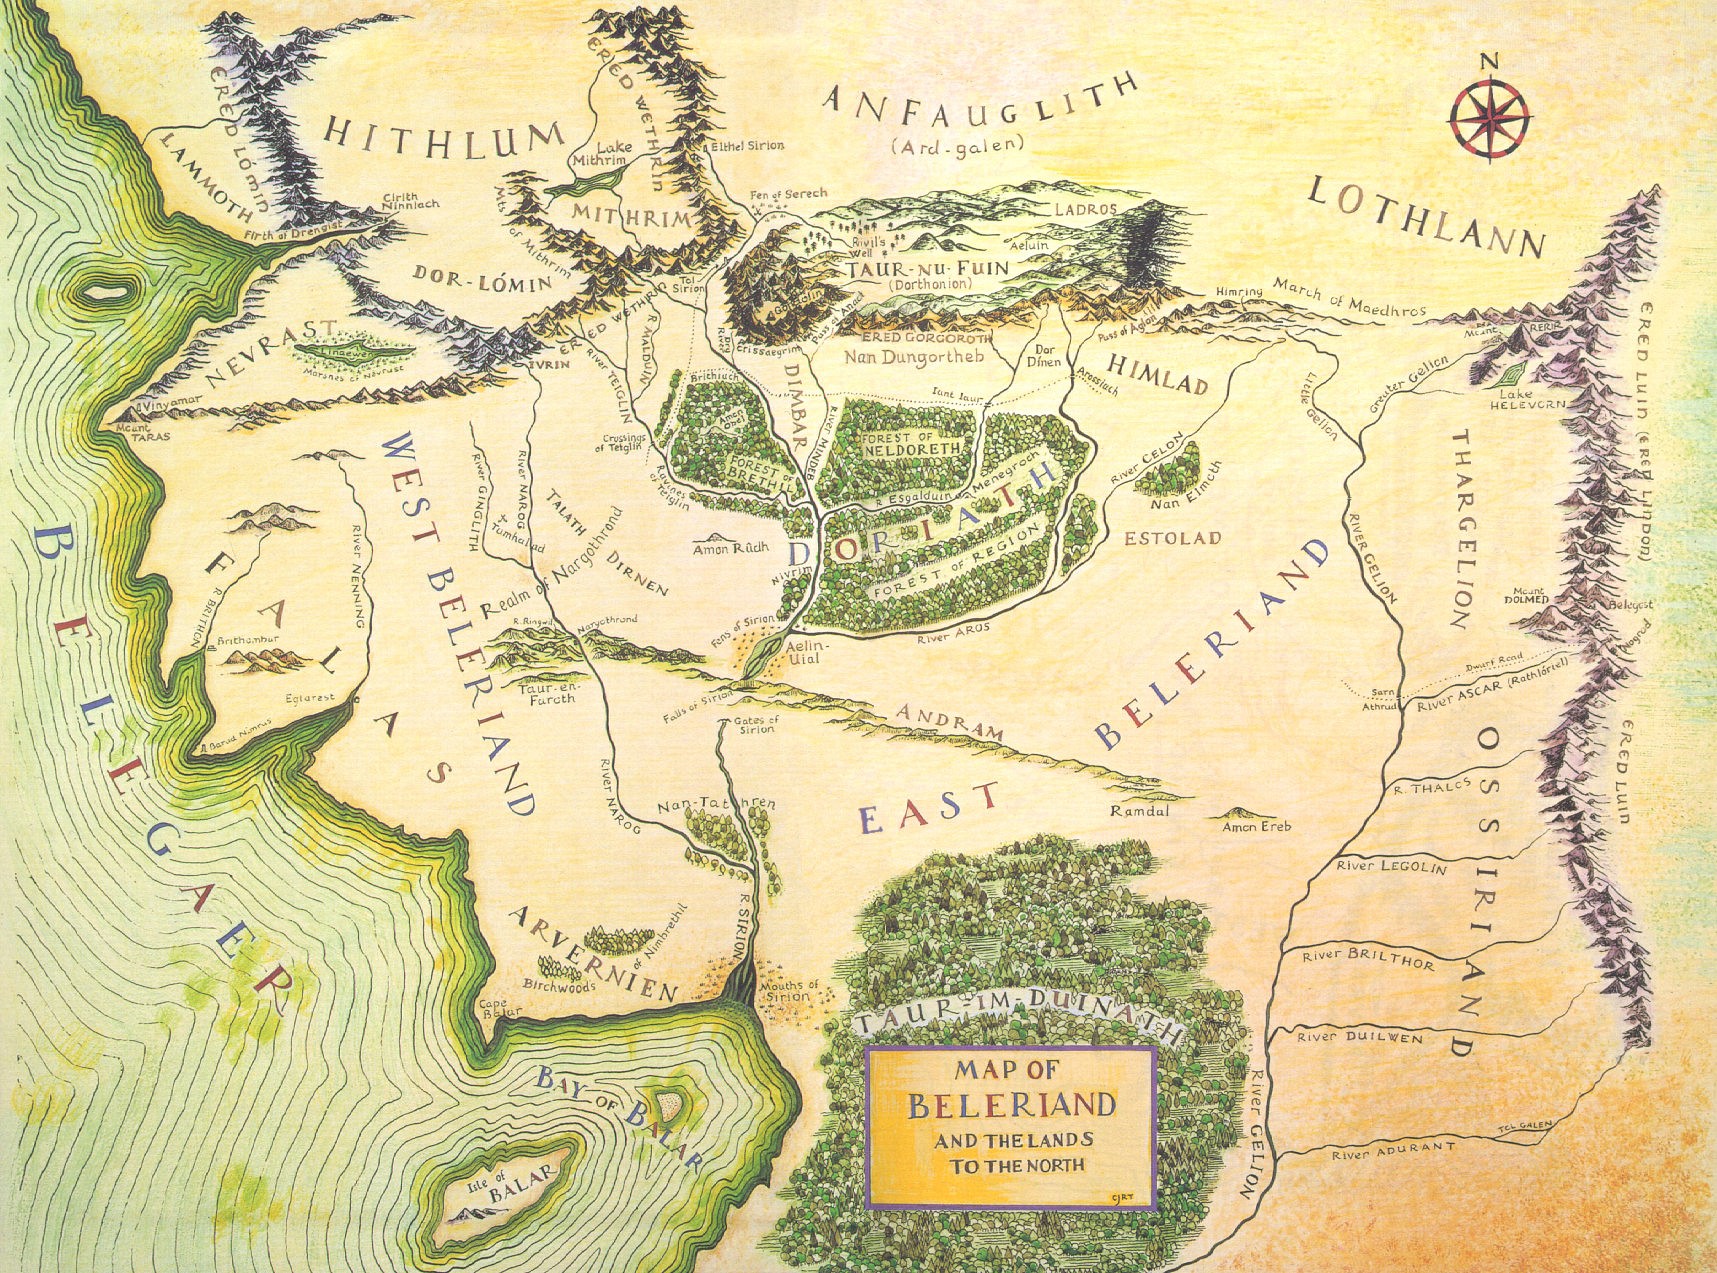 Beleriand And Middle Earth Map Beleriand | The One Wiki to Rule Them All | Fandom